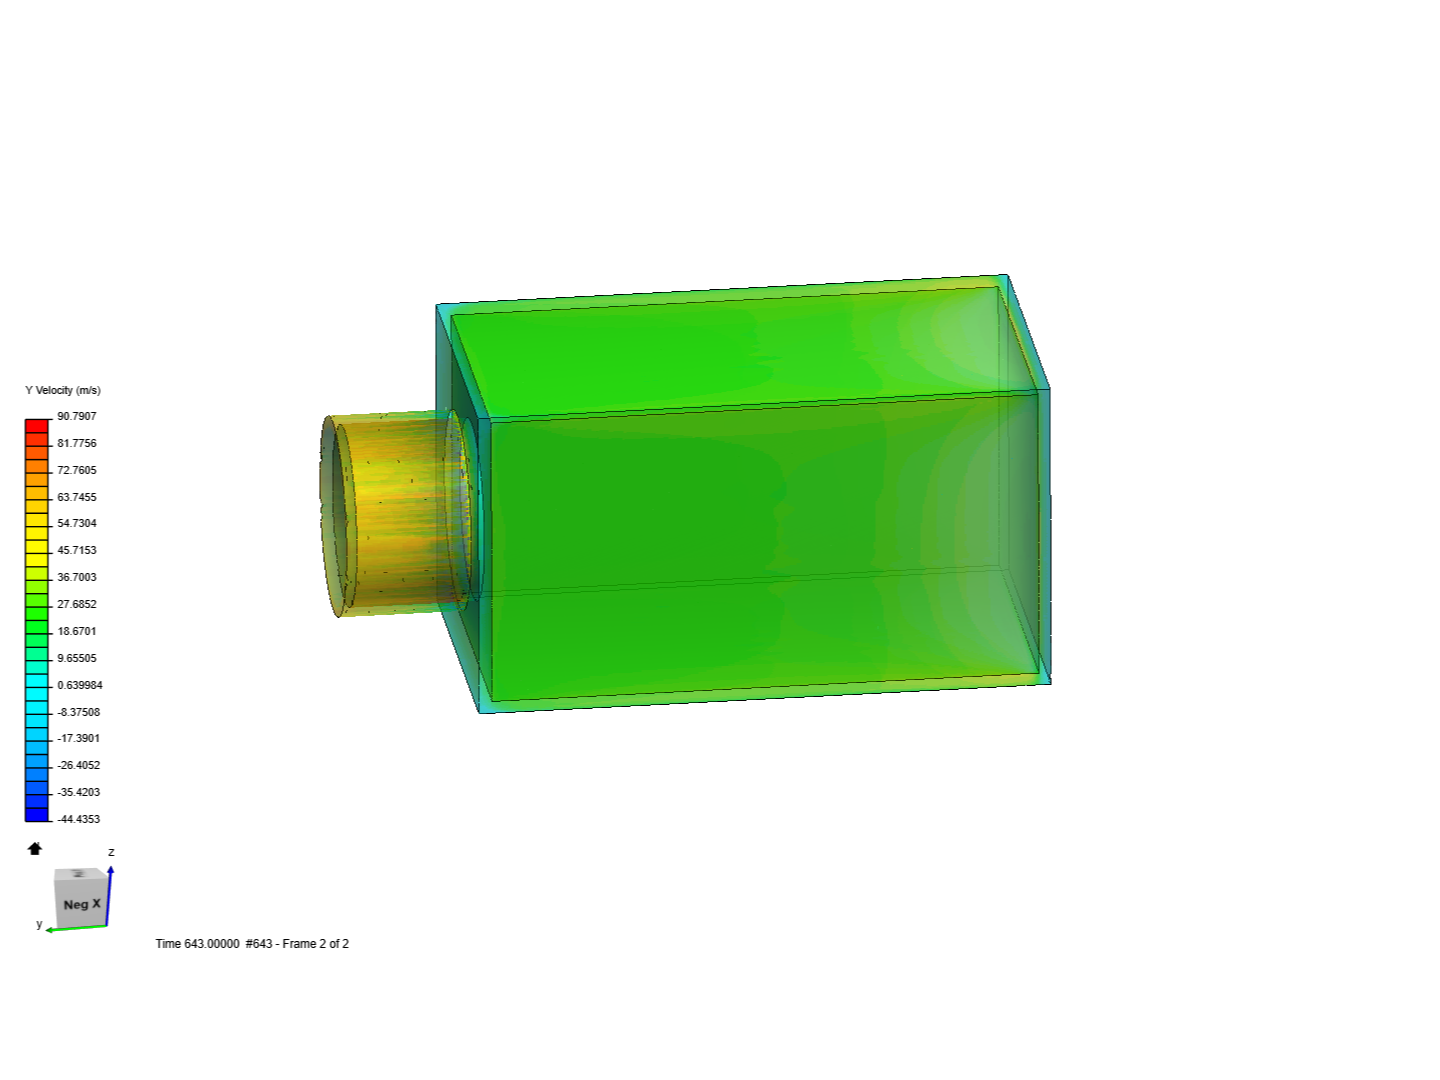 blower cfd image